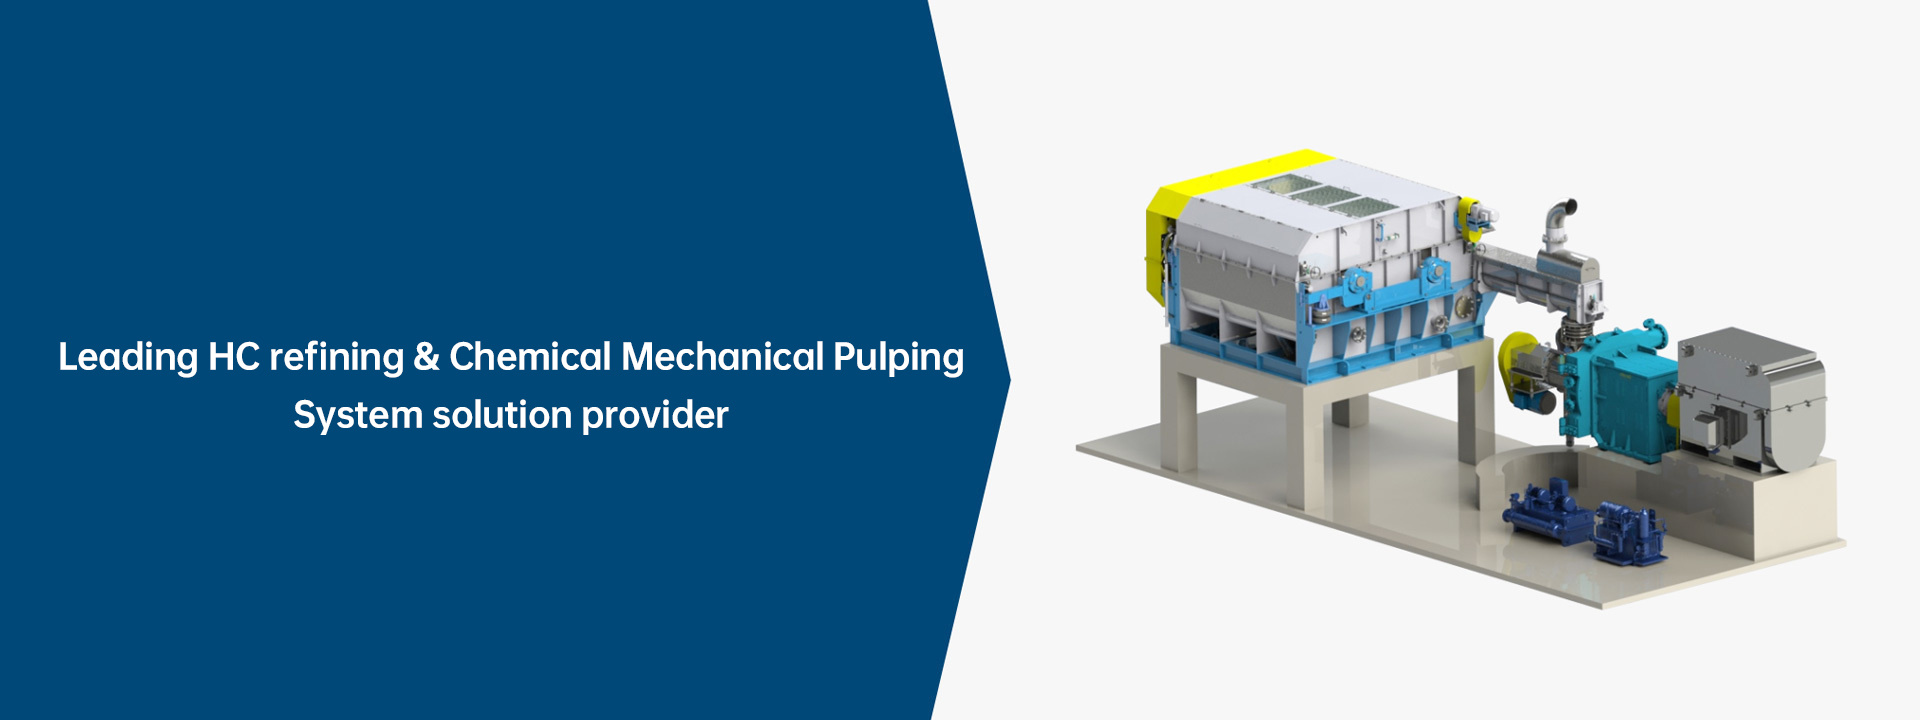 Leading HC Refining & Chemical Mechanical Pulping system solution provider